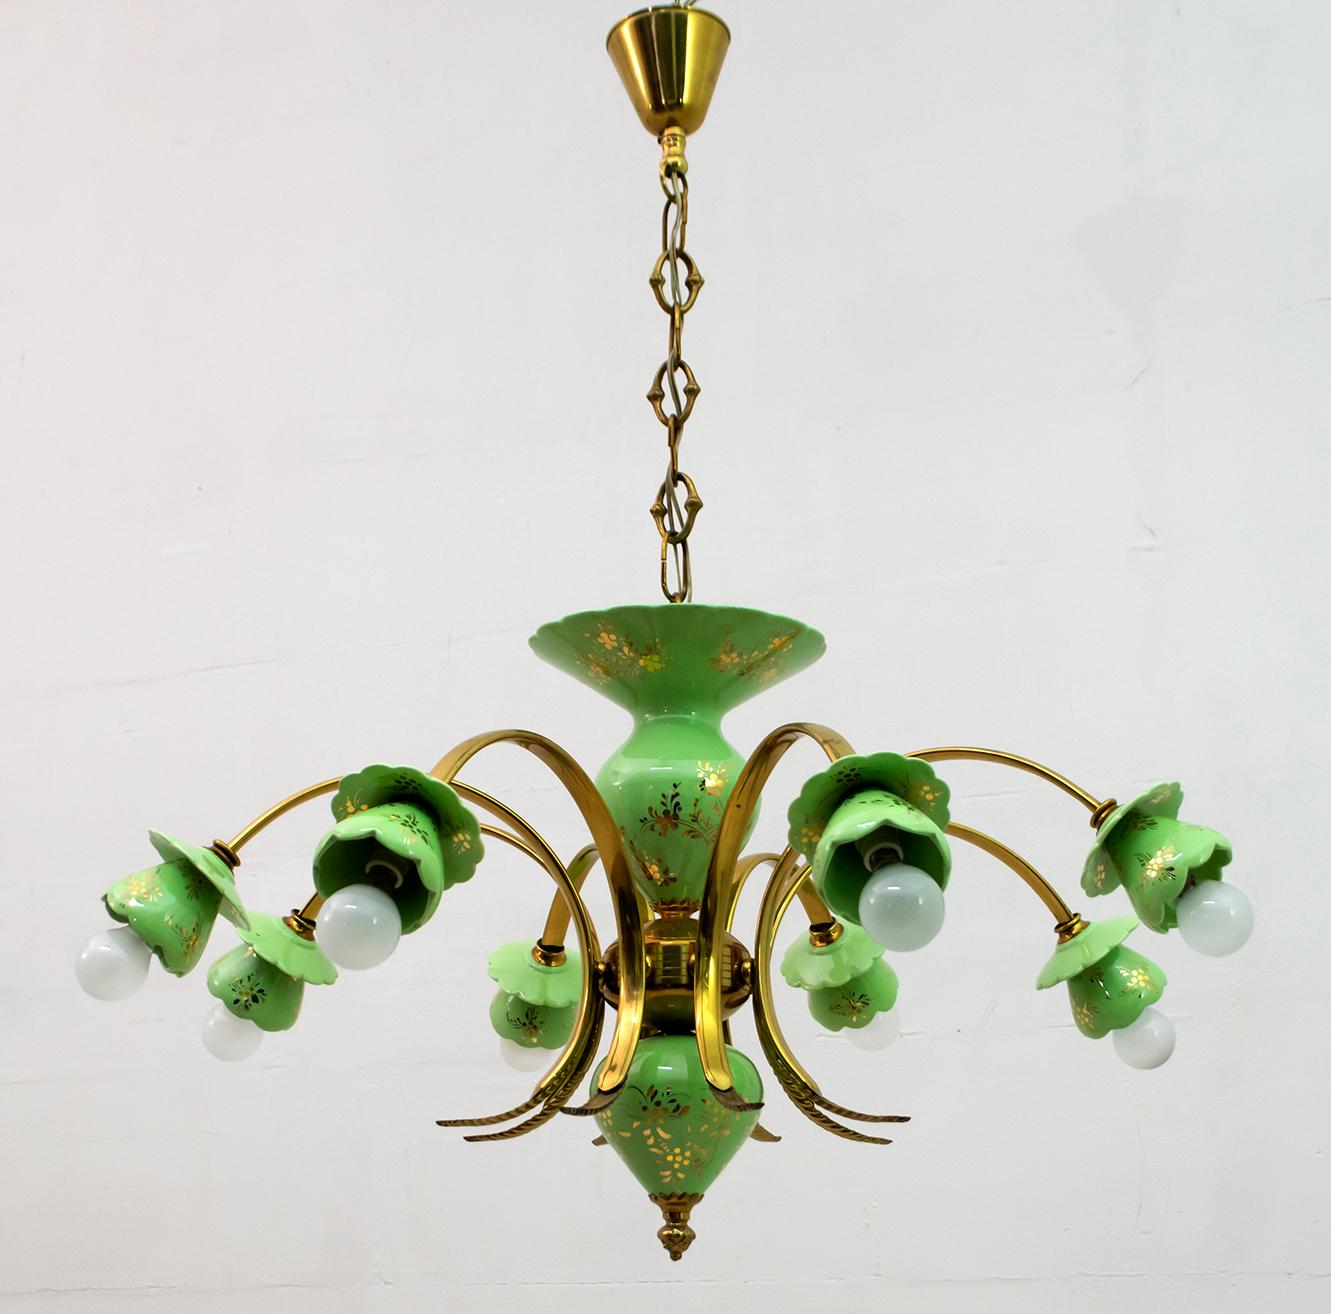 Mid-20th Century Neoclassical Style 8-Iight Italian Porcelain and Brass Chandelier, 1960s For Sale